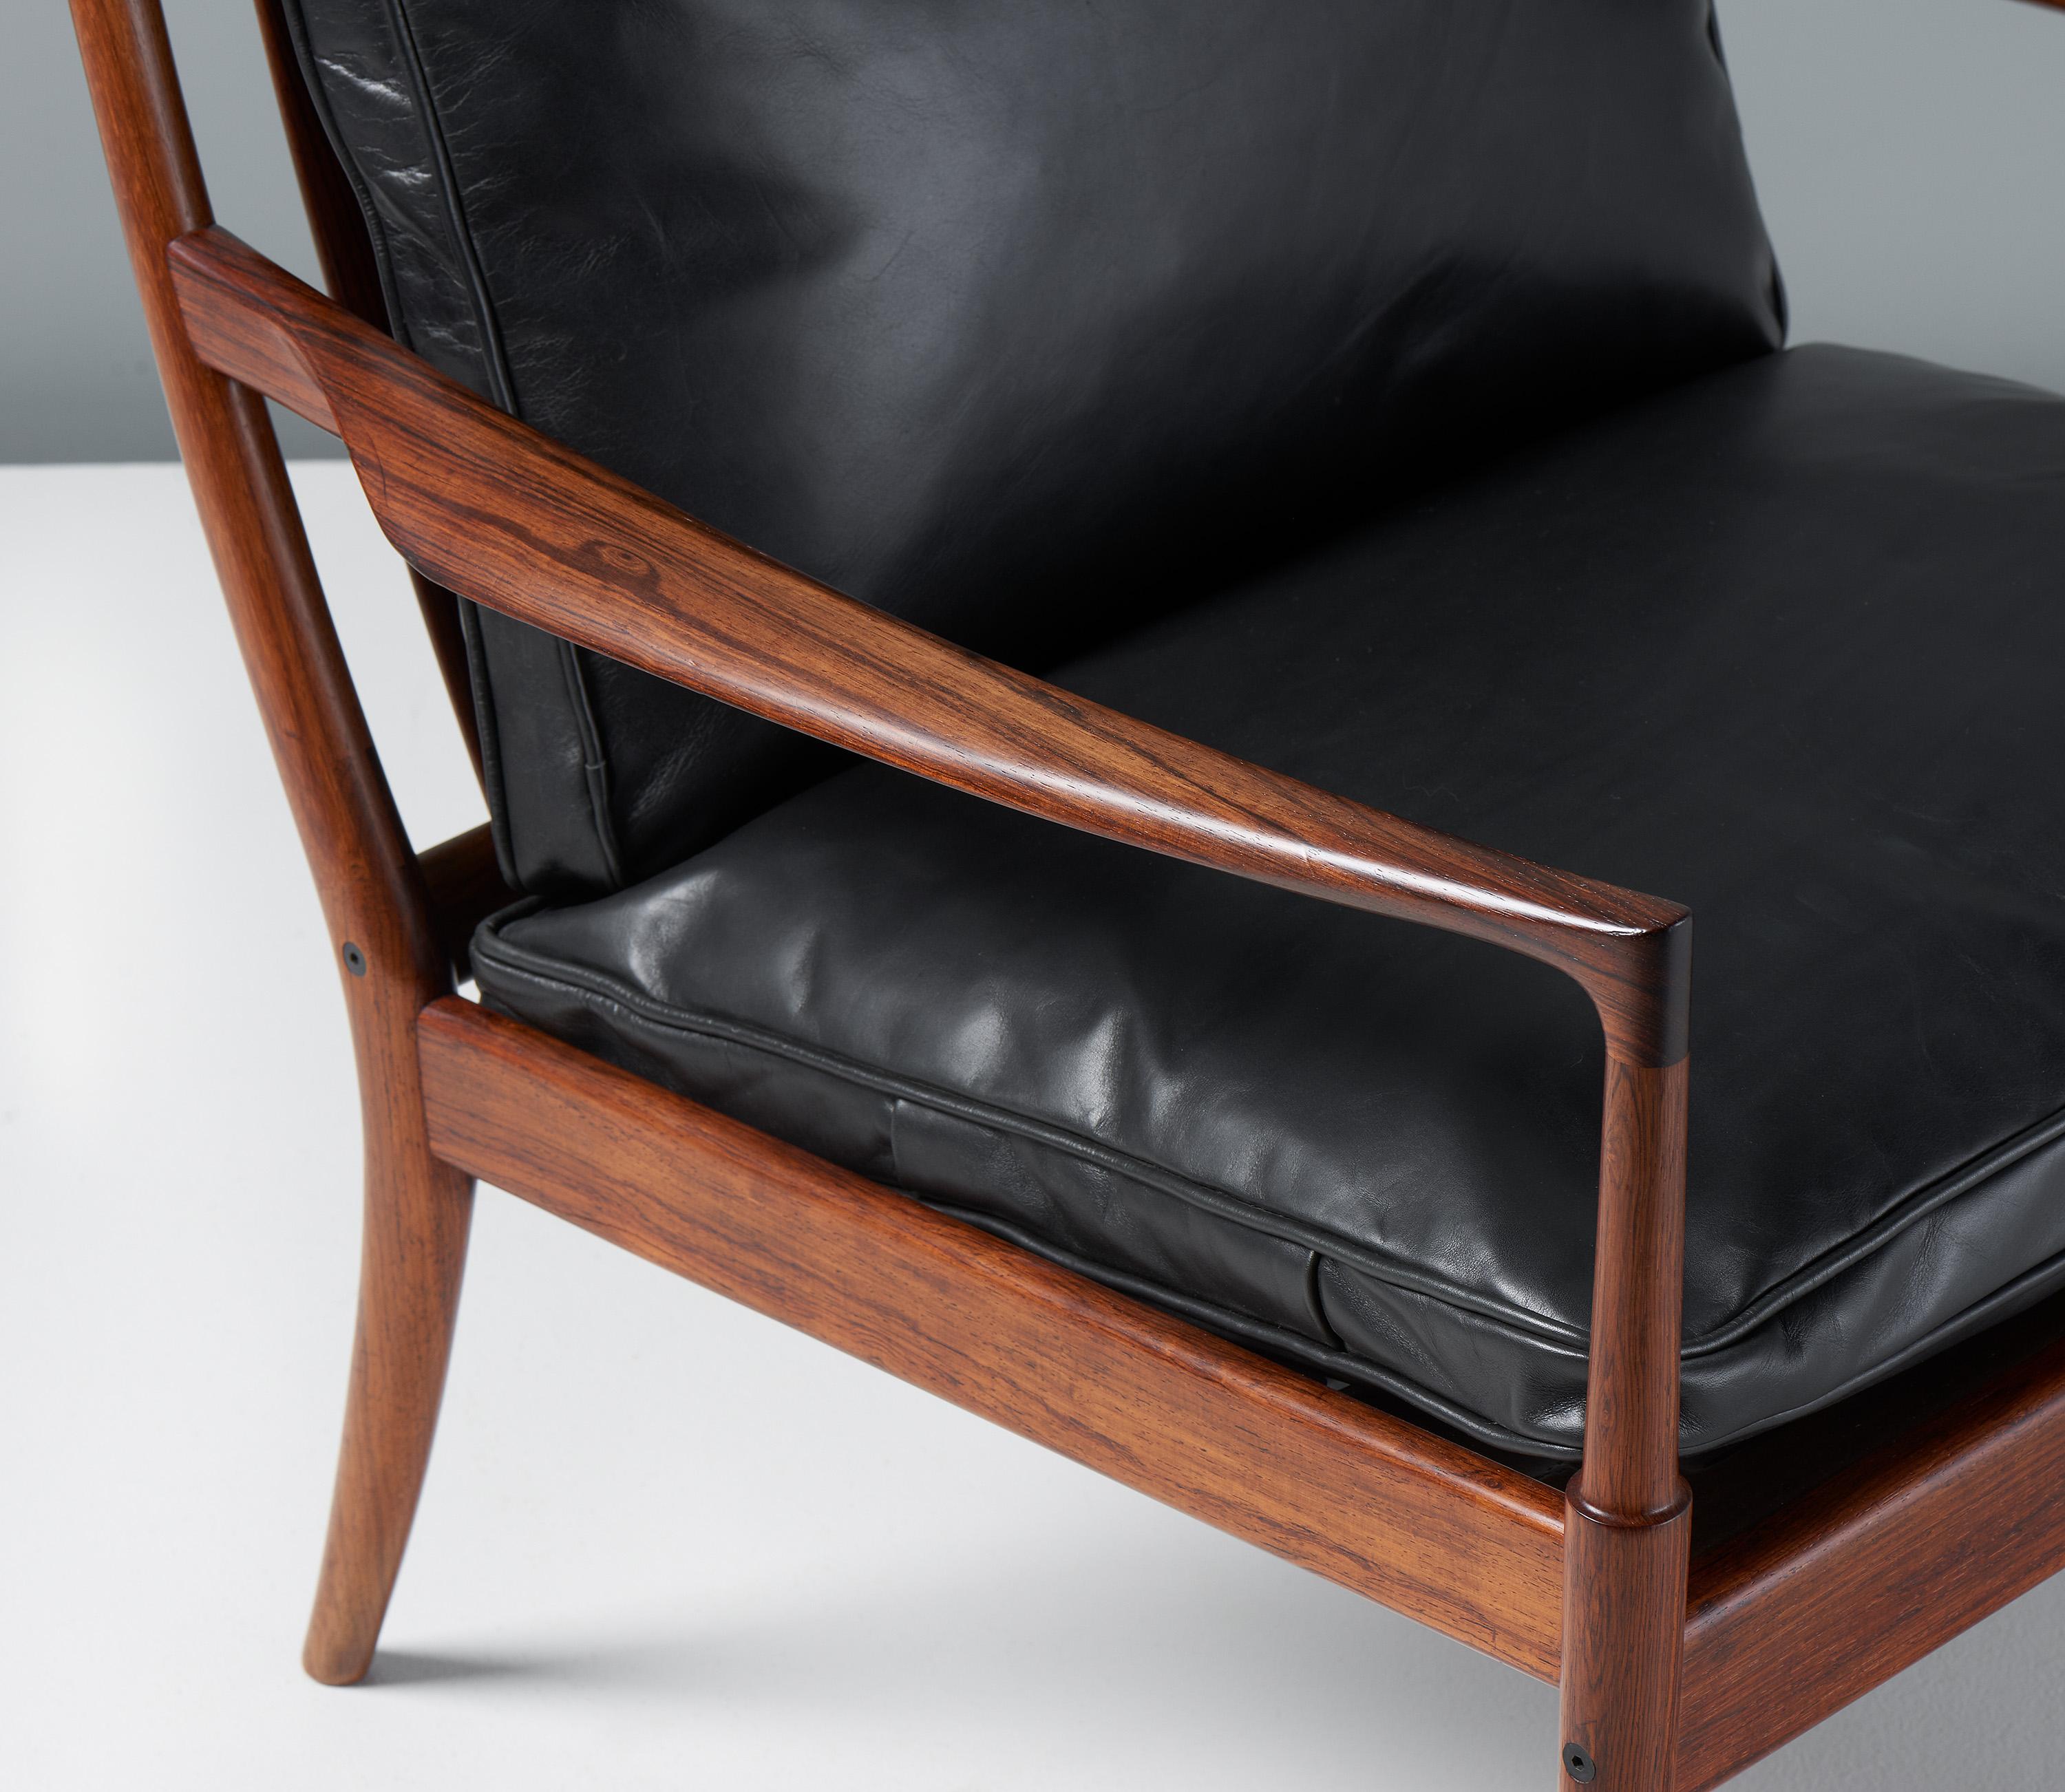 Leather Ib Kofod-Larsen Rosewood Samso Chairs, c1950s For Sale